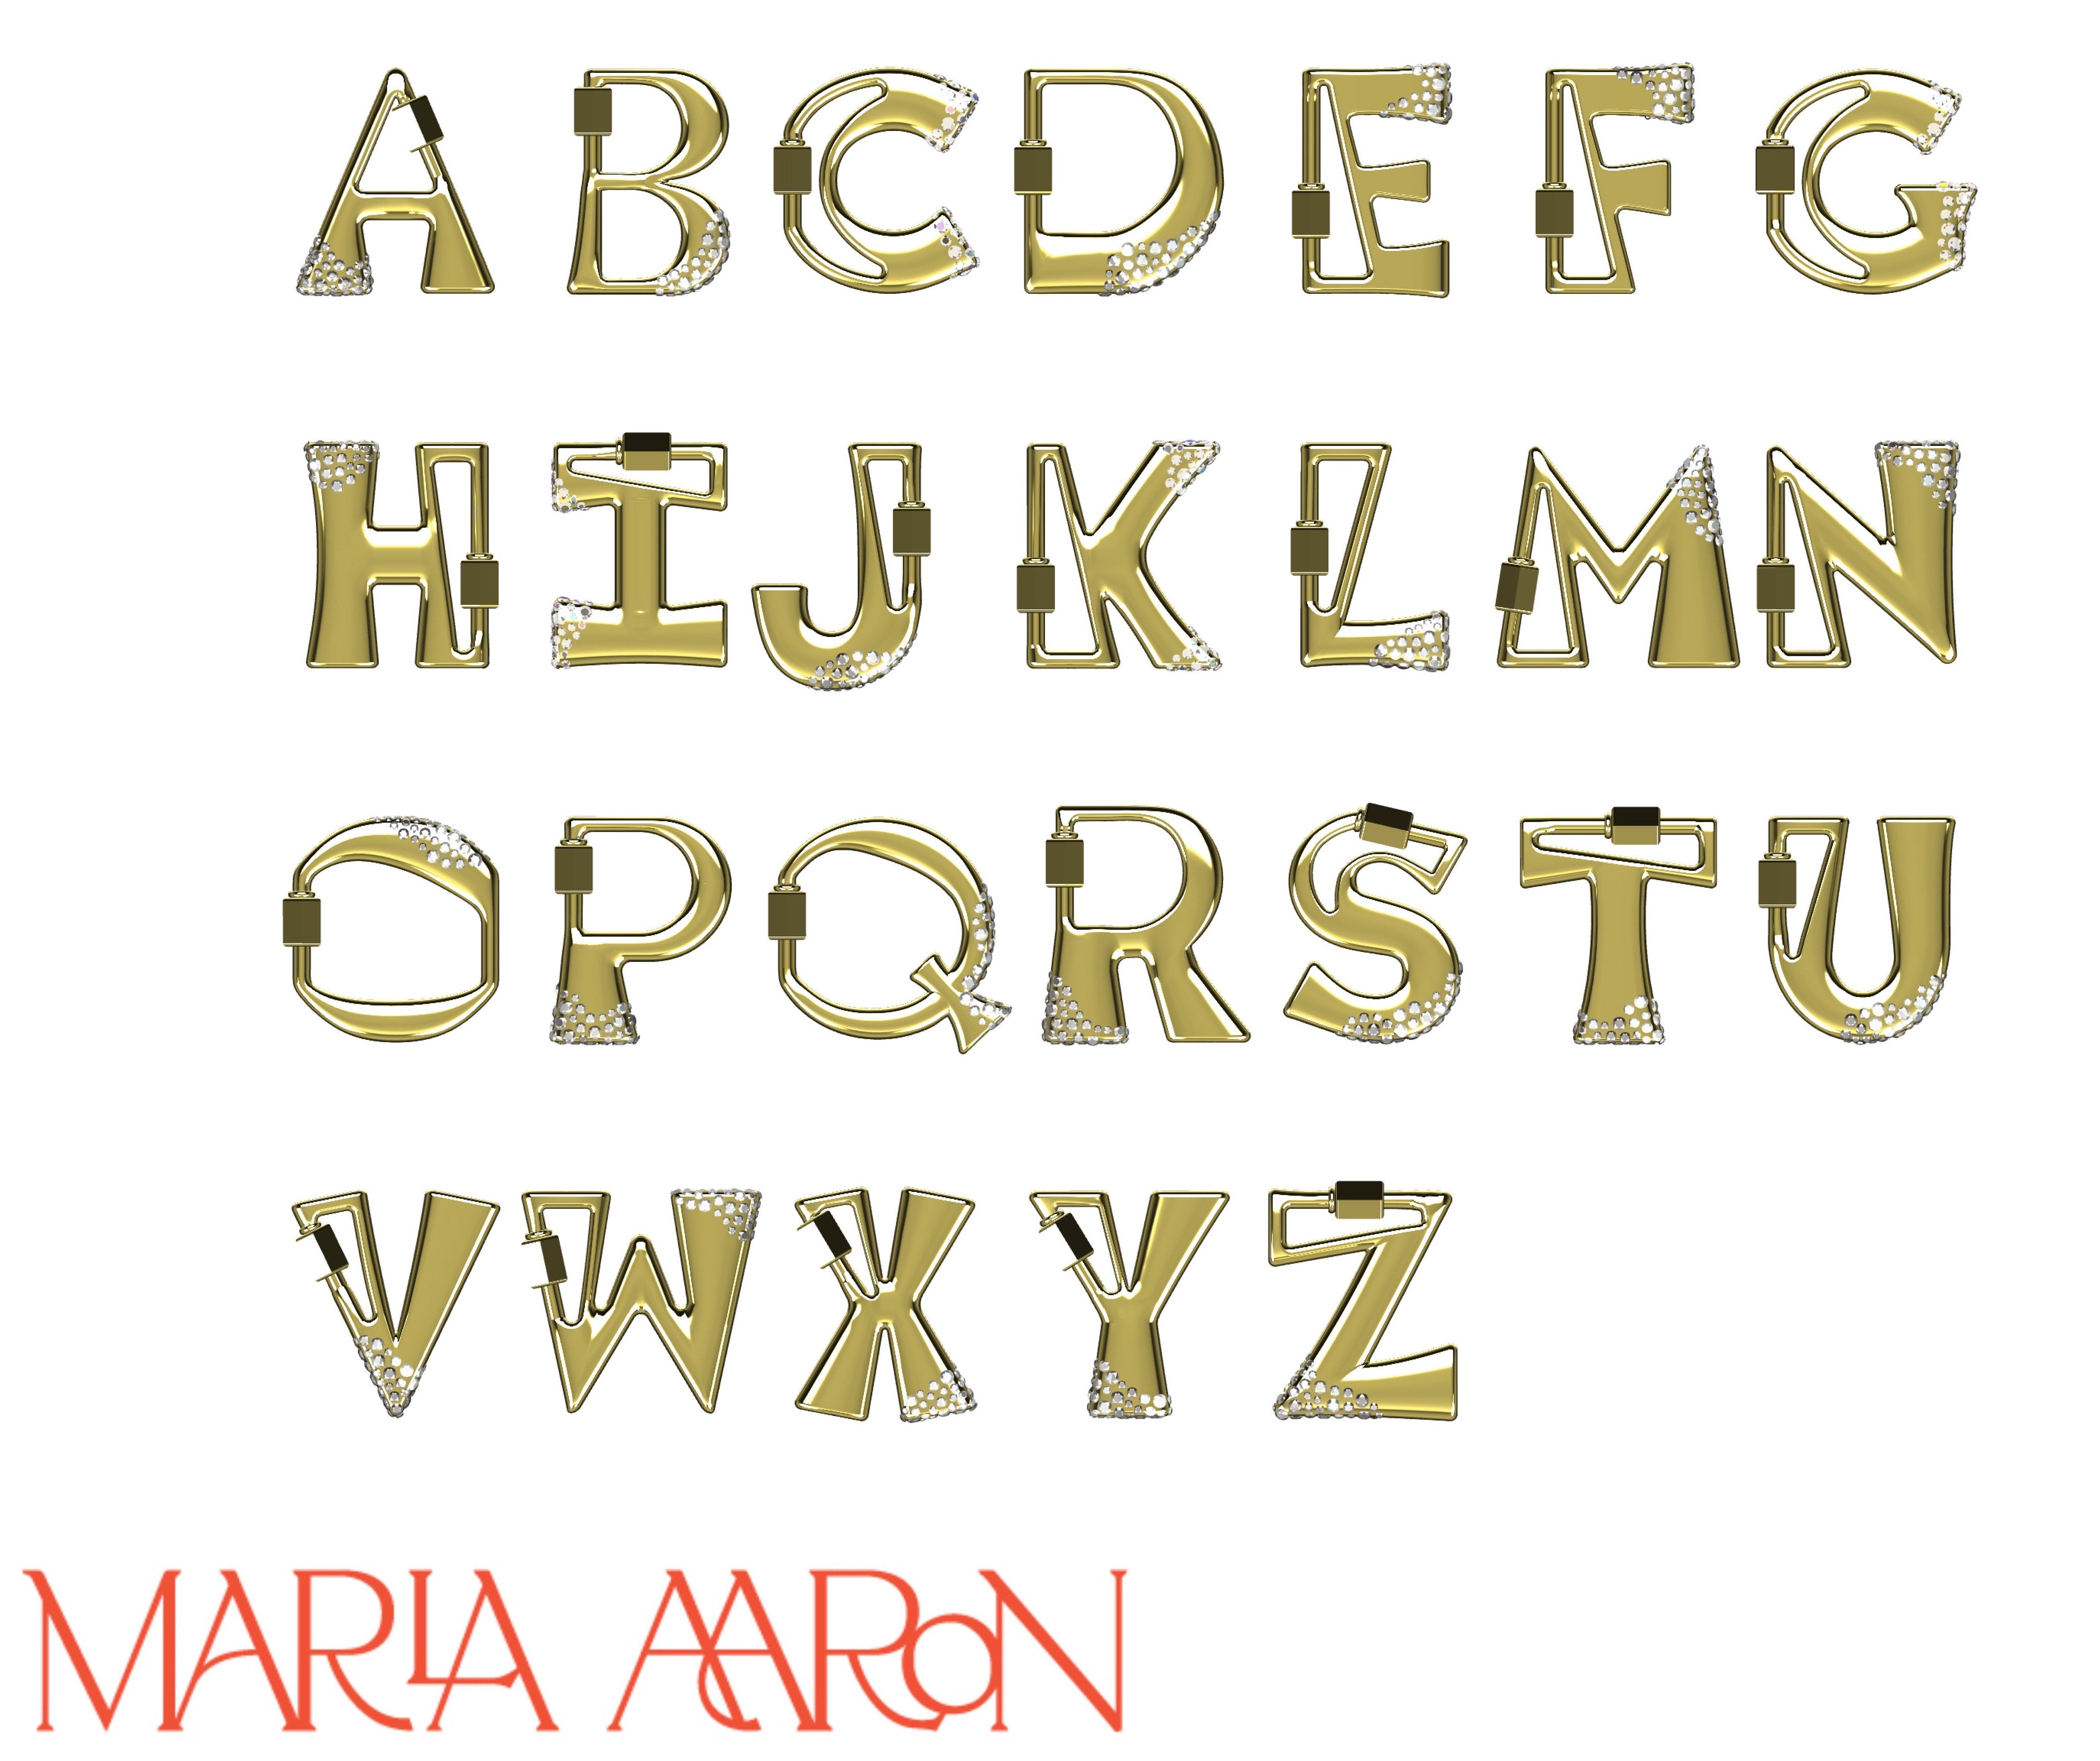 Gold locks of every letter of the alphabet including L charm against white backdrop with Marla Aaron logo in bottom left corner